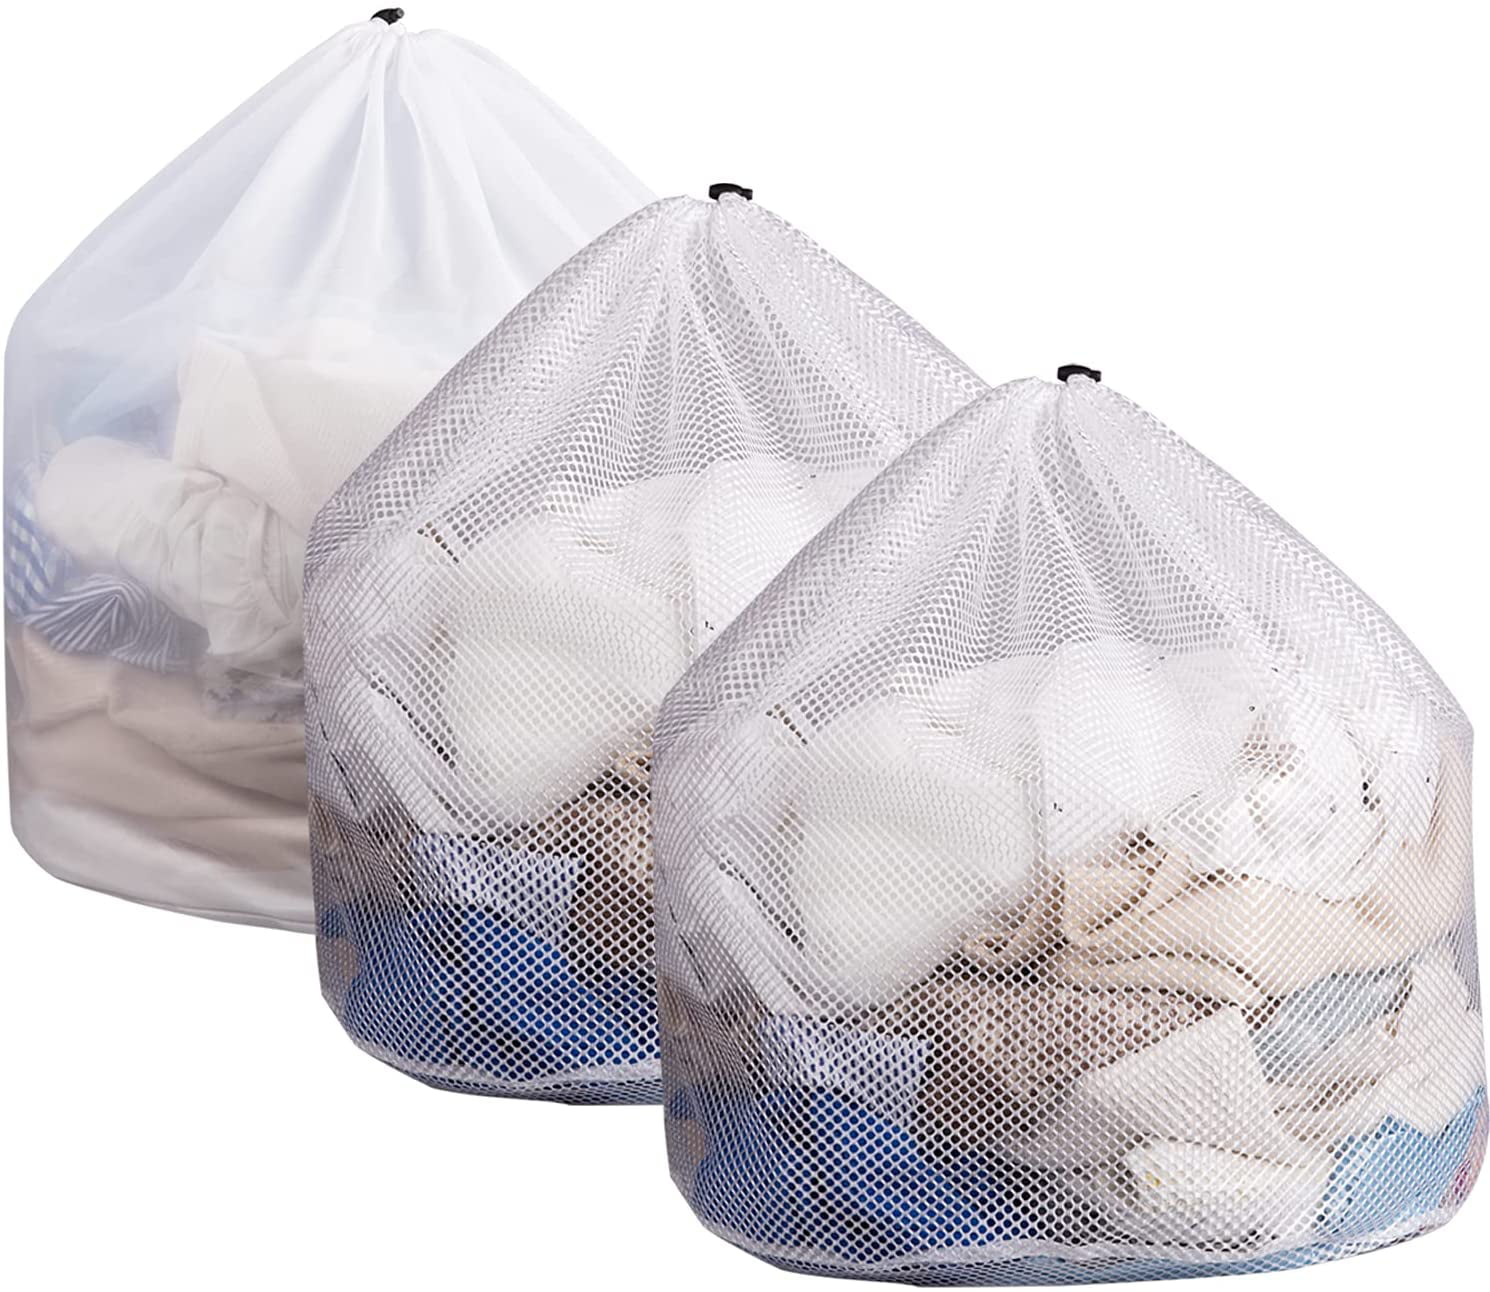 New Washing Machine Used Mesh Net Bags Laundry Bag Large Thickened Wash Bags 